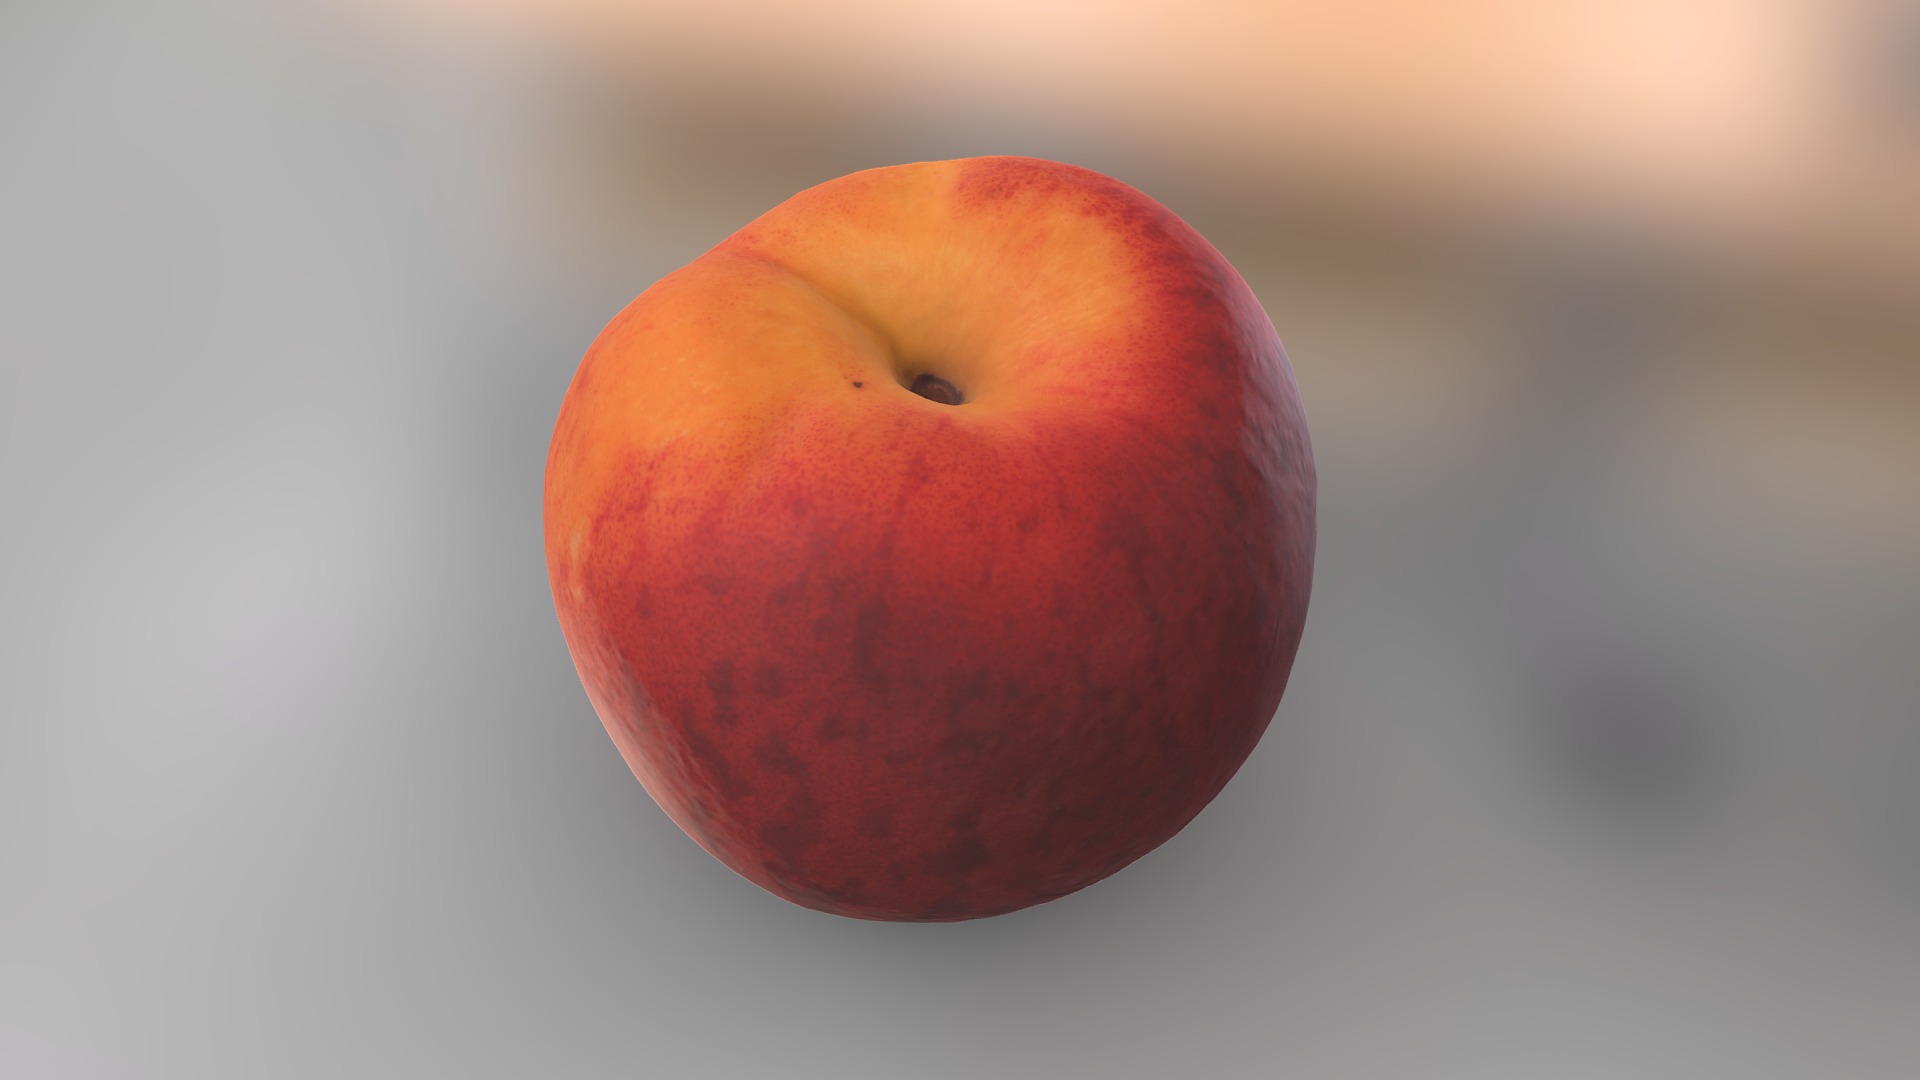 3D model Peach - This is a 3D model of the Peach. The 3D model is about a red apple on a white surface.